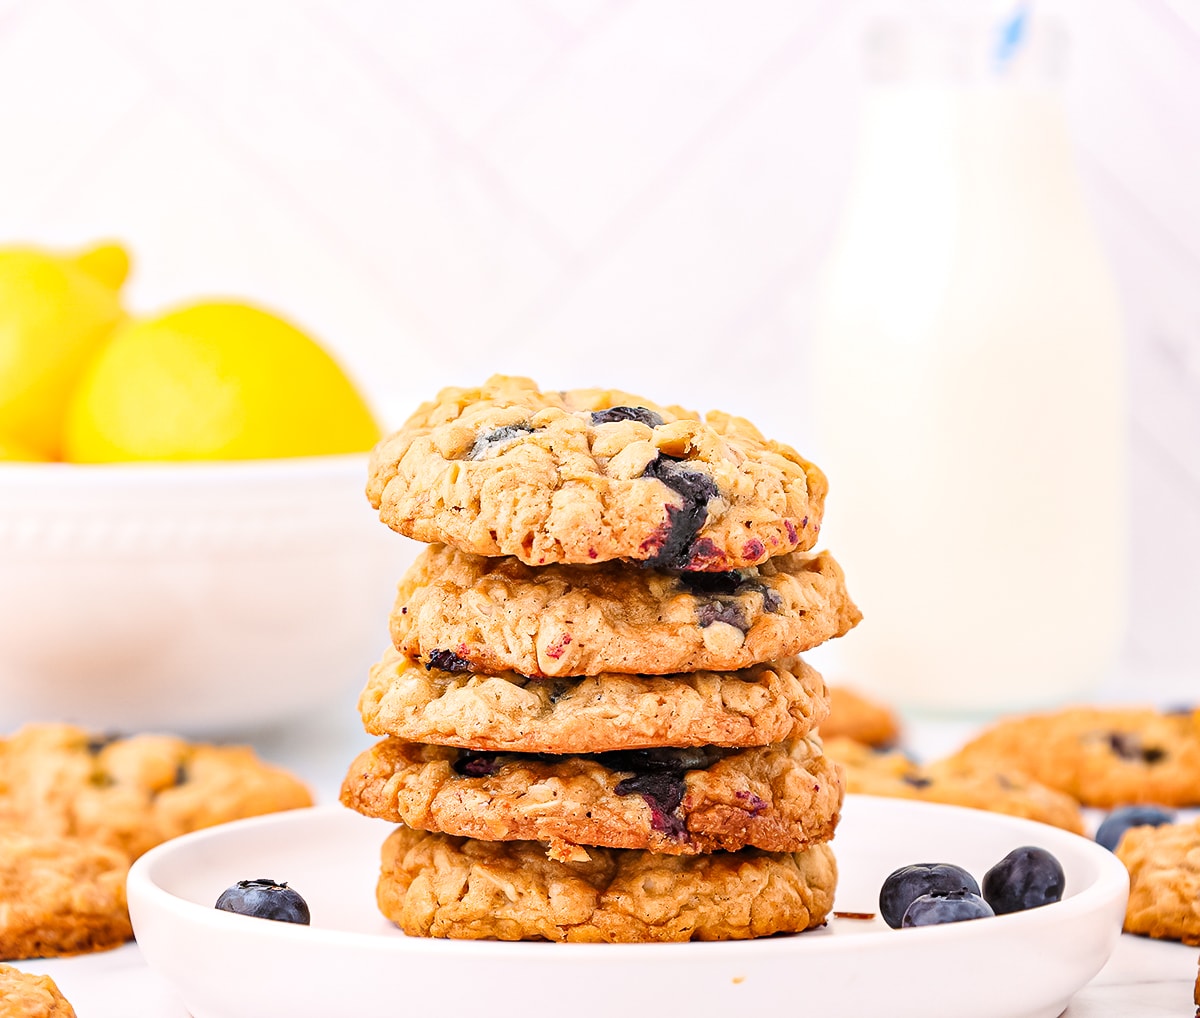 A stack of five blueberry lemon oatmeal cookies piled high on a white plate surrounded by fresh blueberries and a bowl of lemons and tall glass of milk in the background.